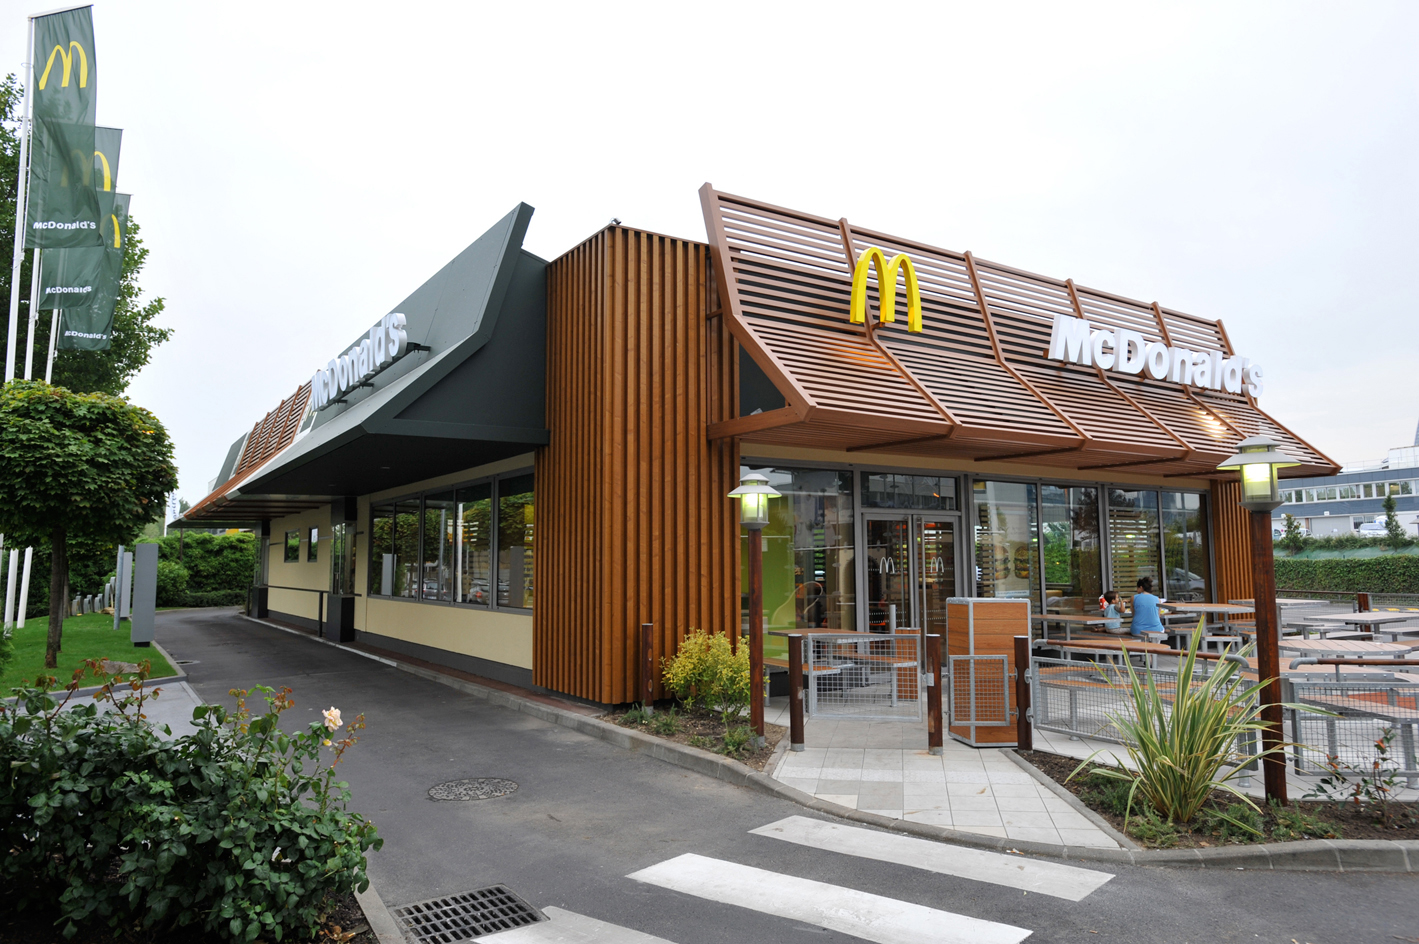 PHOTO: A McDonald's is seen in Nanterre, France.